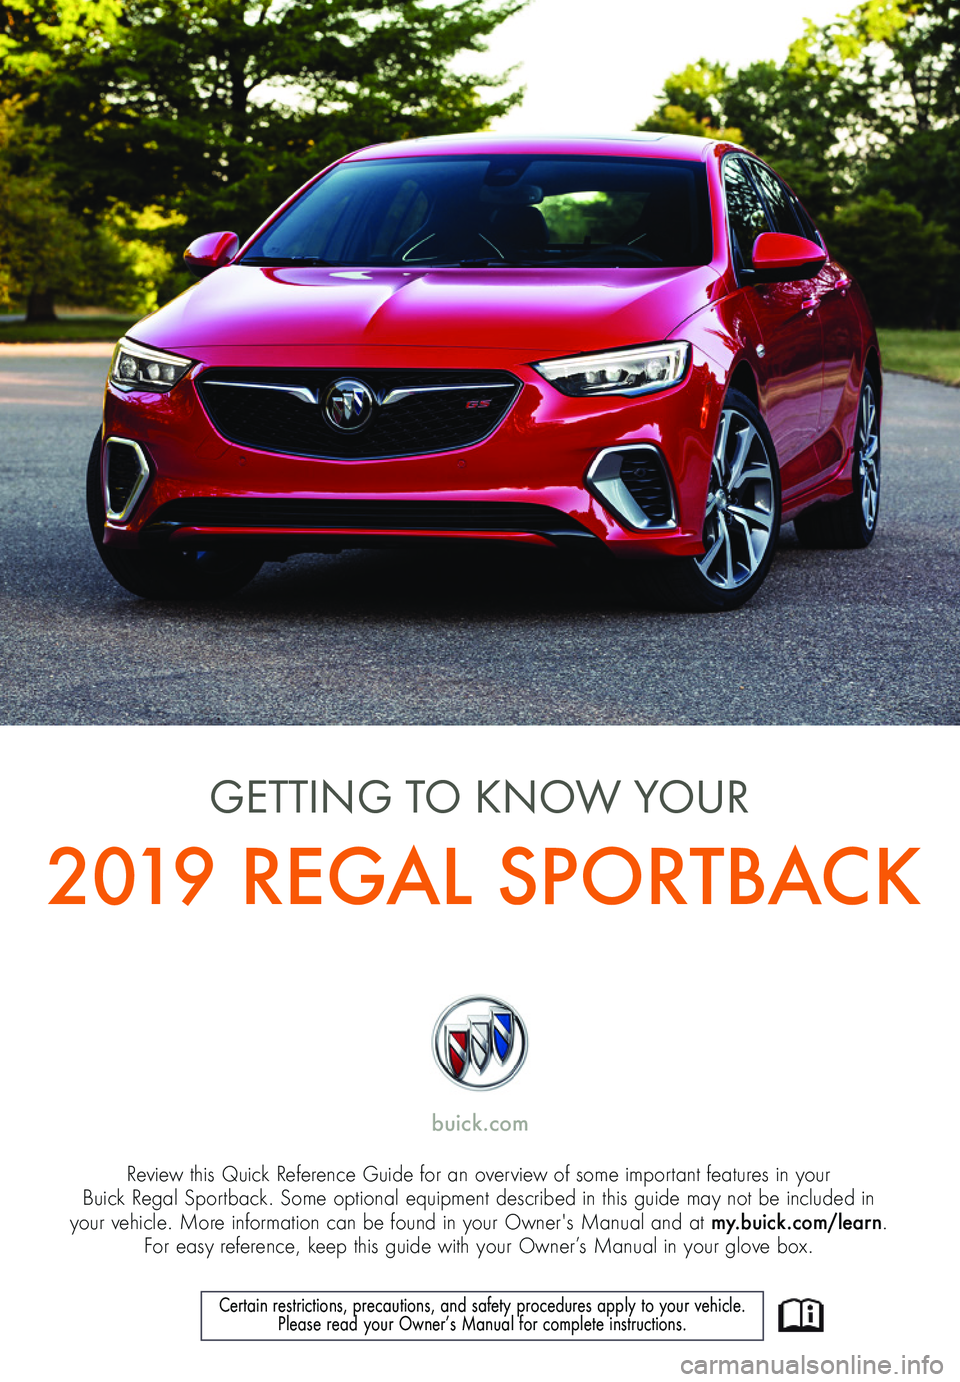 BUICK REGAL SPORTBACK 2019  Get To Know Guide 1
Review this Quick Reference Guide for an overview of some important features in your  Buick Regal Sportback. Some optional equipment described in this guide may not be included in  your vehicle. Mor